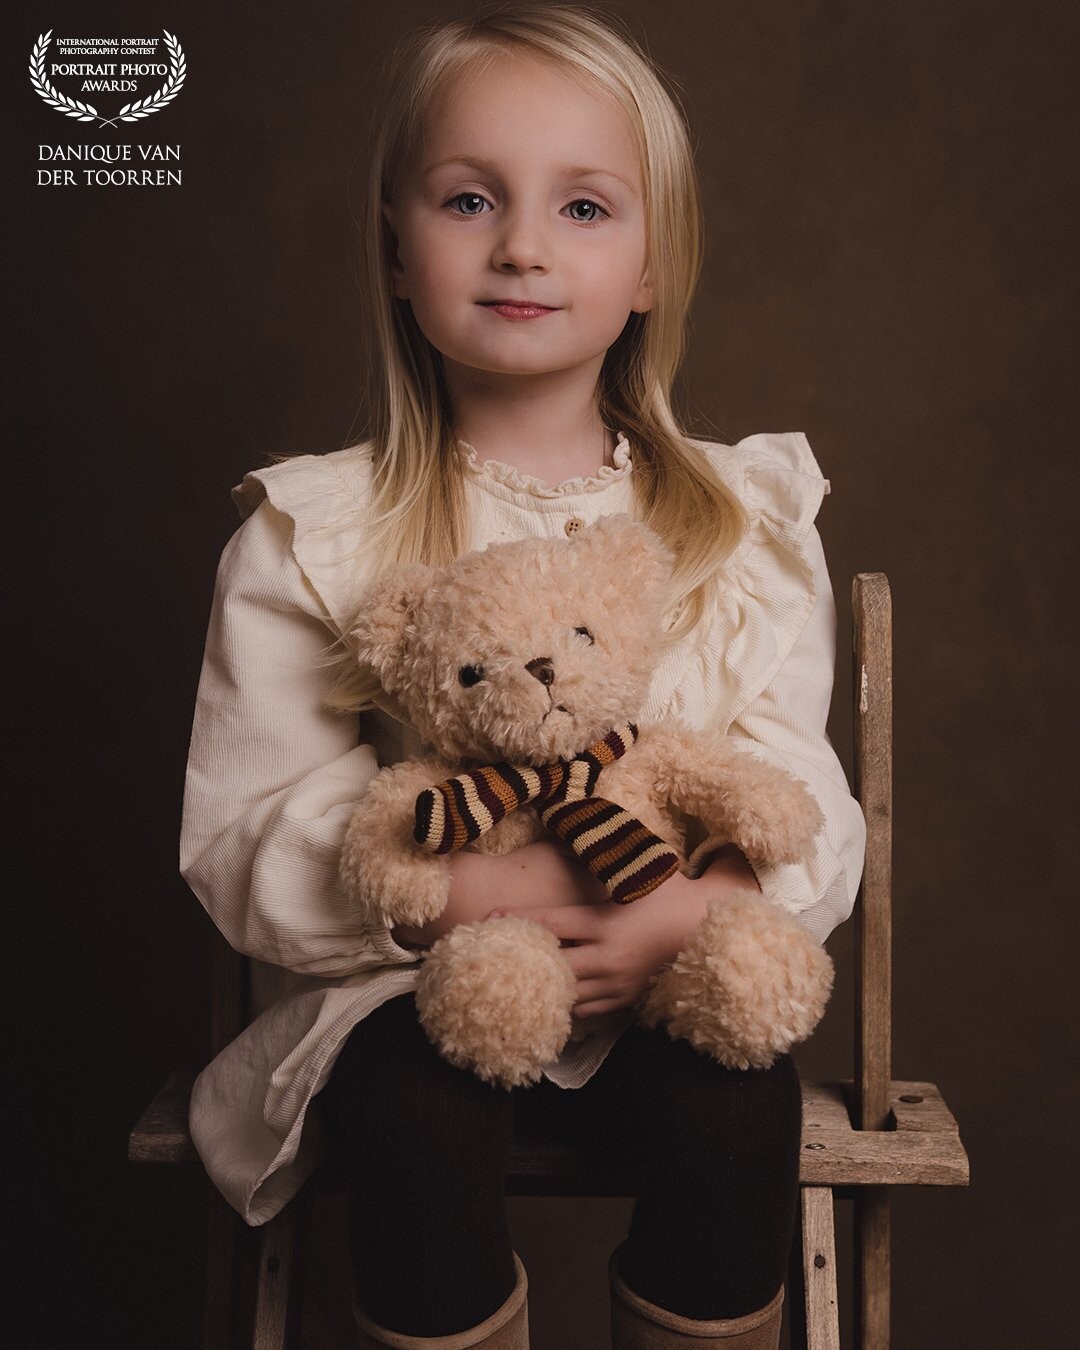 This is beautiful Olivia .<br />
A beautiful model together with her bear<br />
<br />
Model: Olivia<br />
Photo & Lightroom edit: @daniquevdtphotography